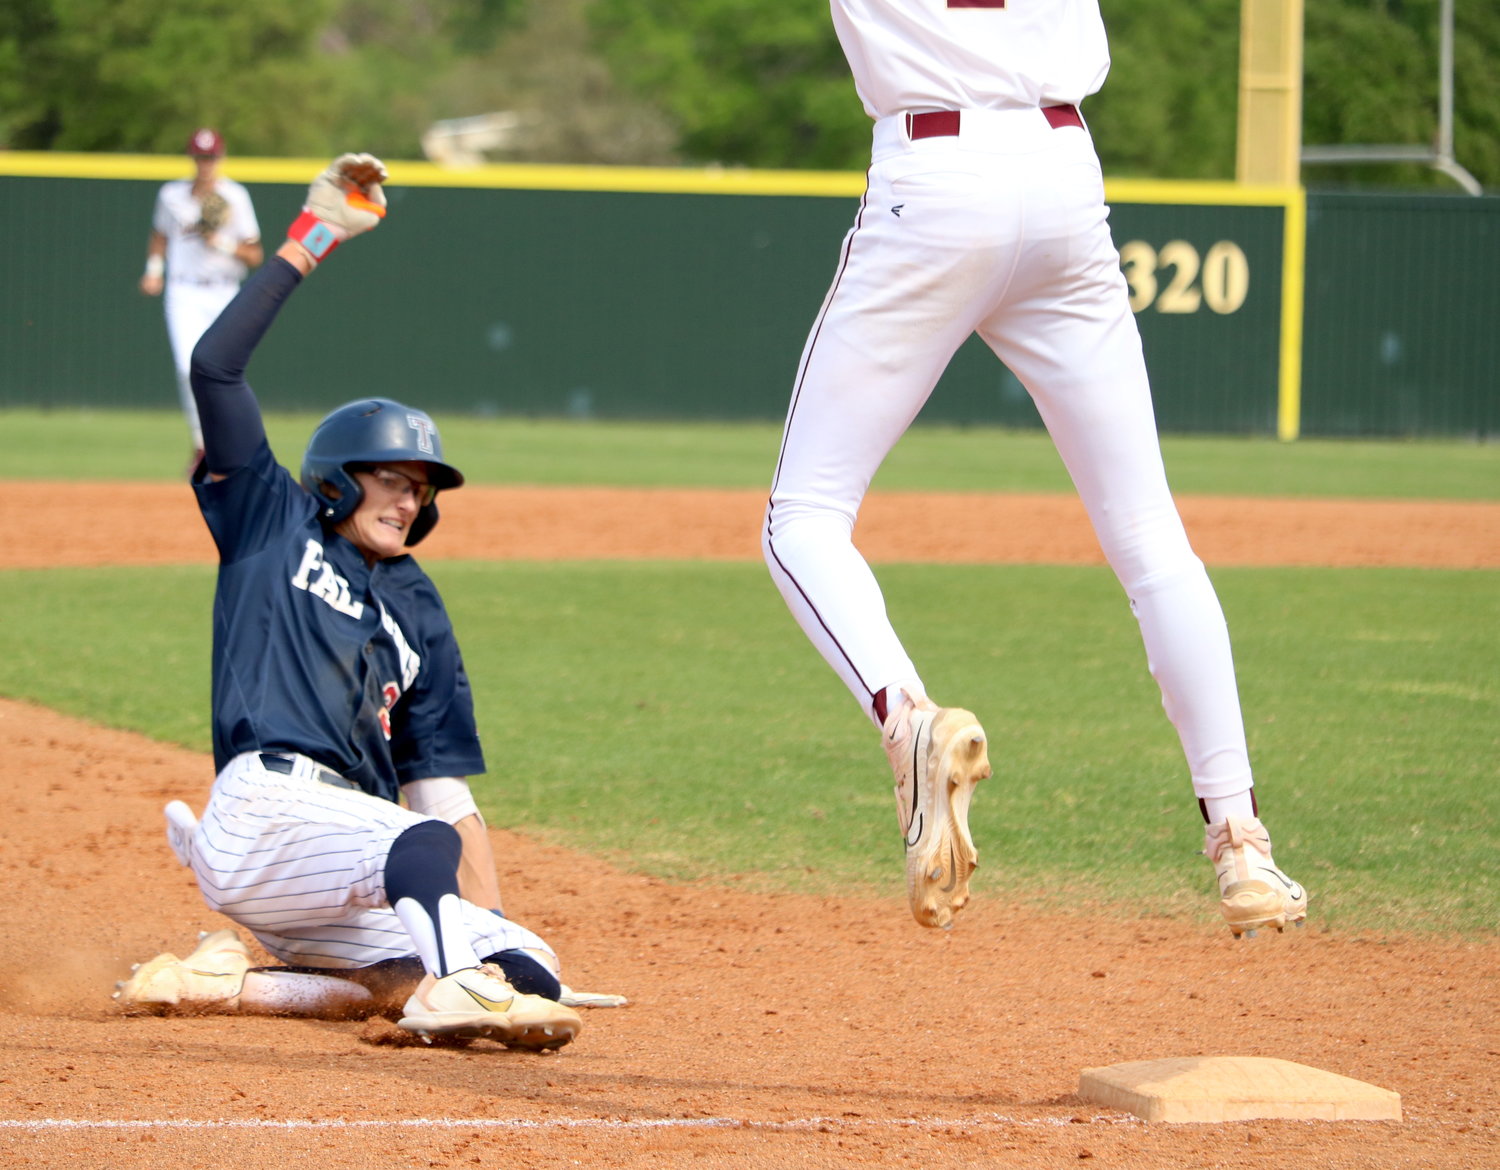 Drew Markle slides into third base after hitting a triple during Tuesday's game between Tompkins and Cinco Ranch at the Cinco Ranch baseball field.